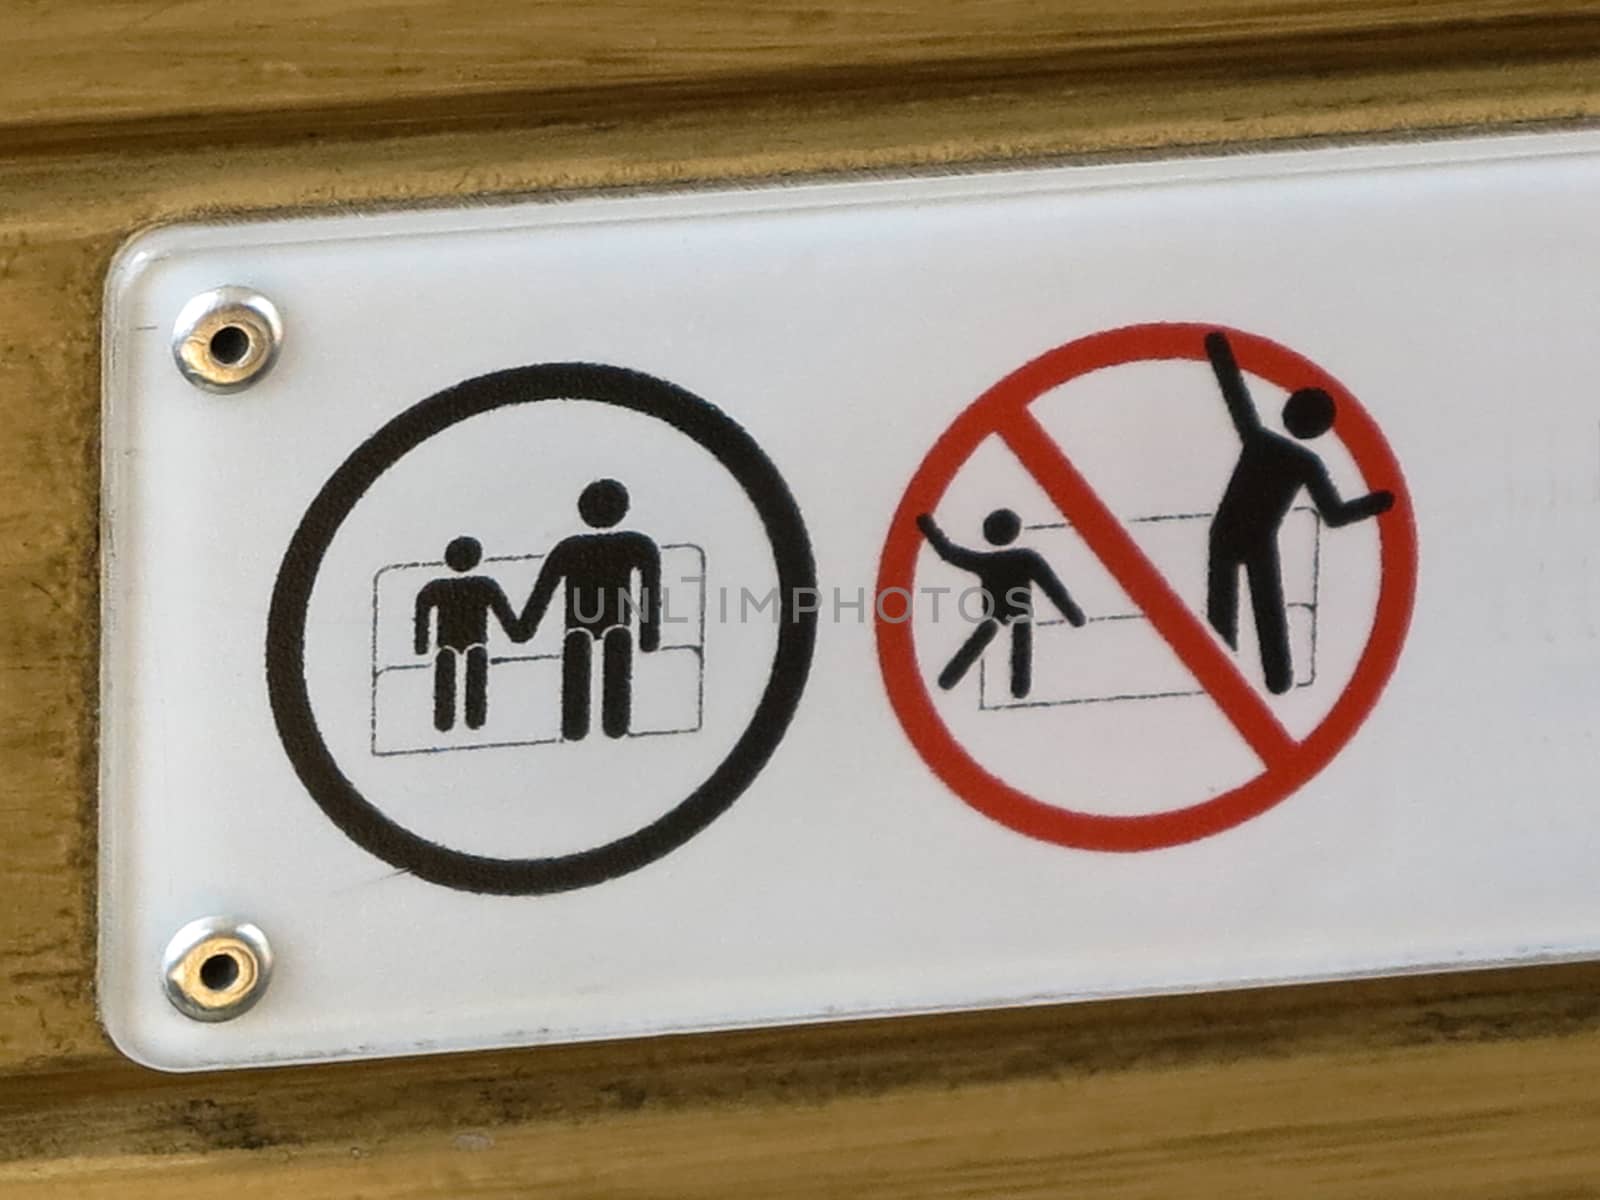 A safety sign asking passengers to sit down